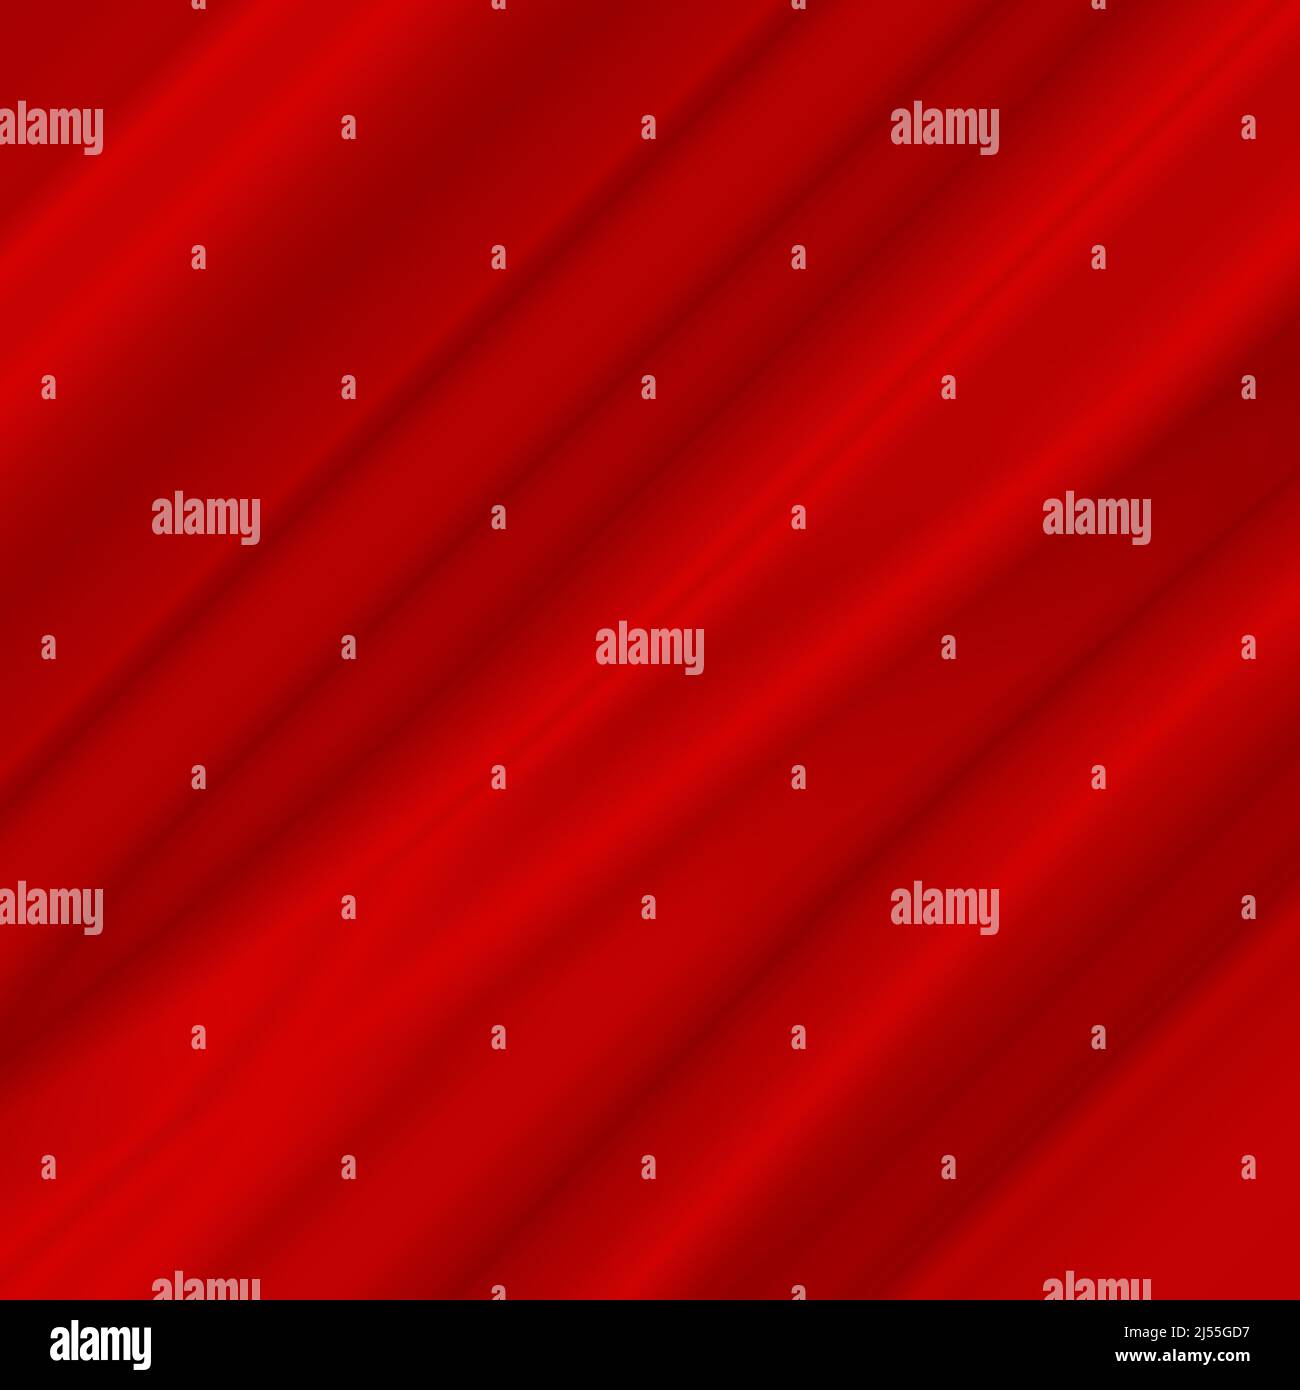 Red satin texture with folds of fabric for design elements and backgrounds. Stock Photo